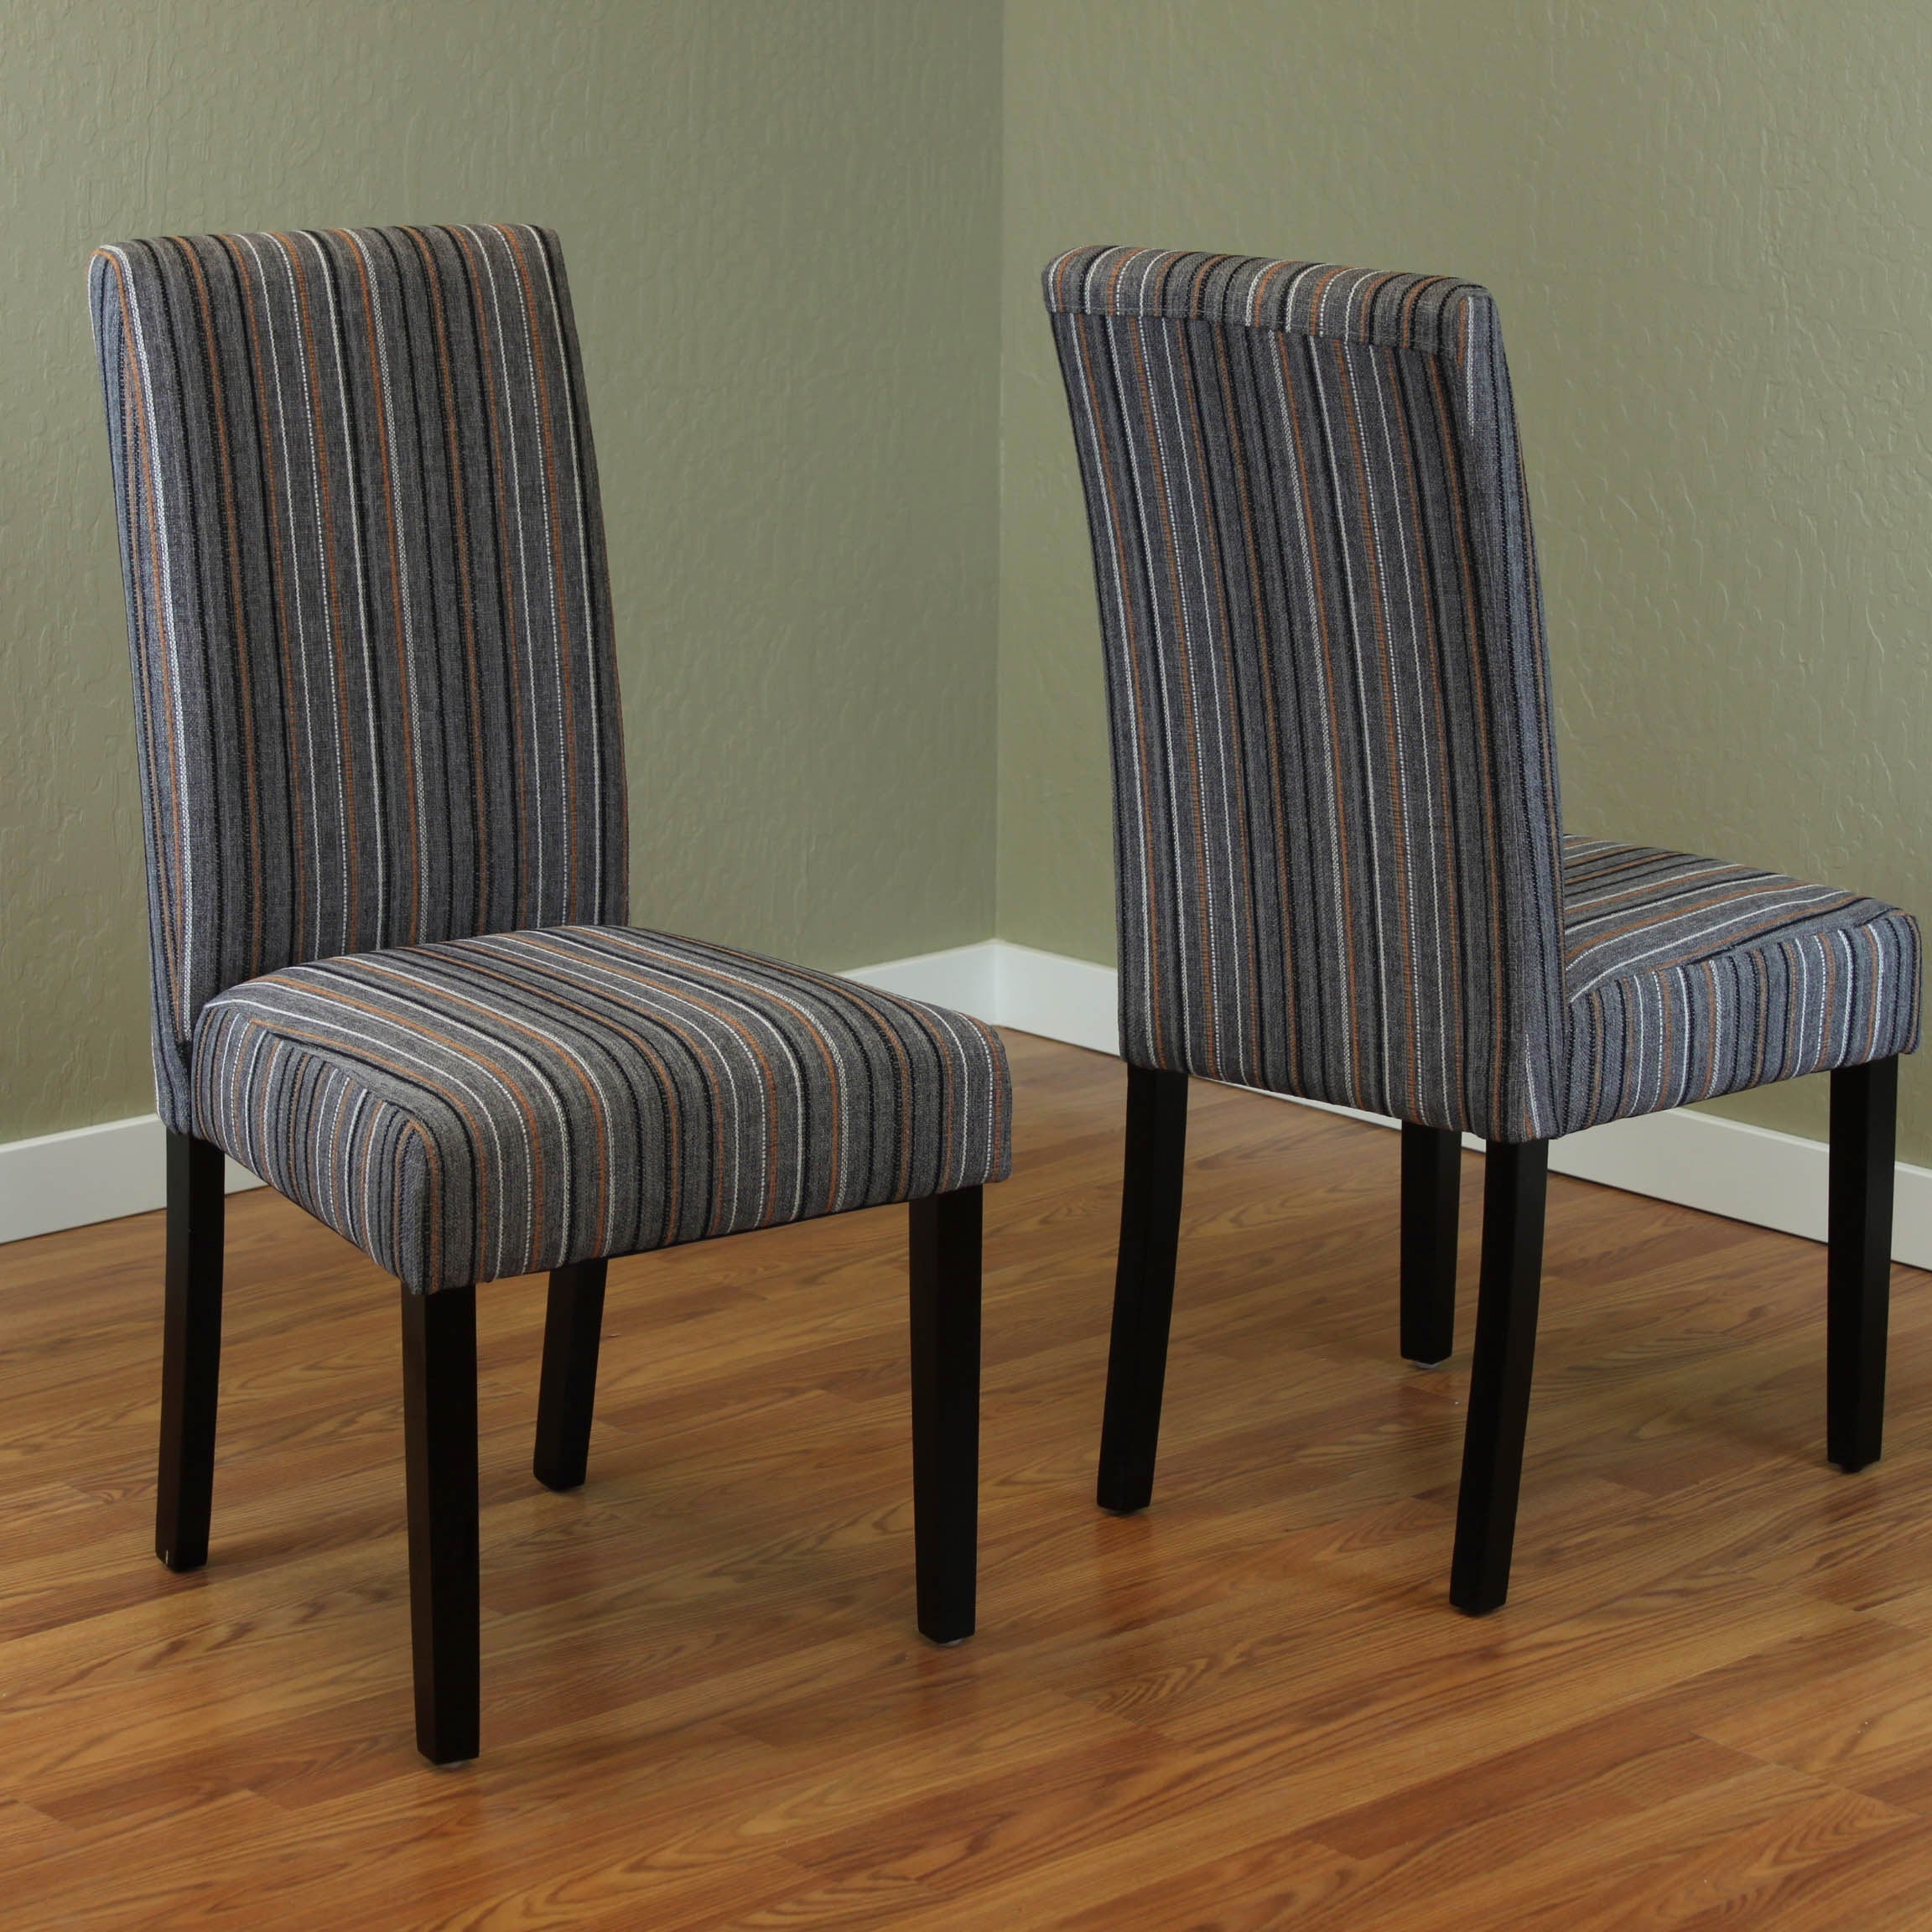 Seville Stripe Fabric Dining Chairs (Set of 2)